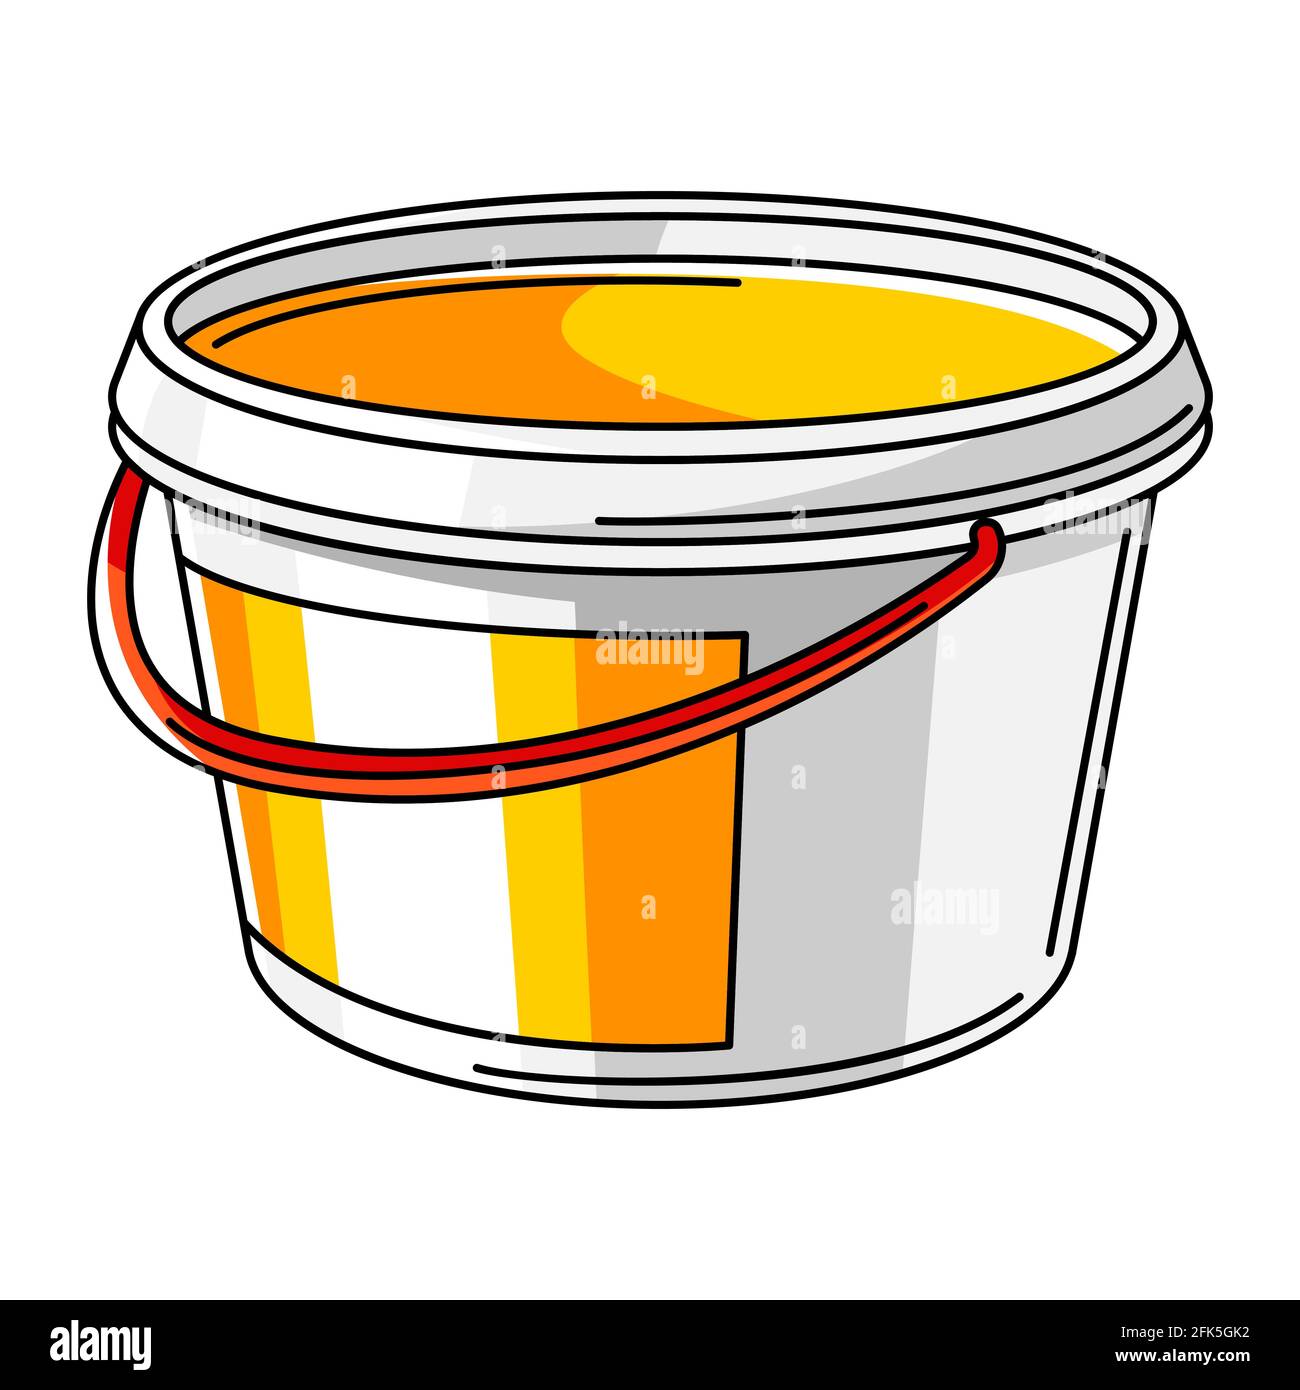 Paint containers Stock Vector Images - Alamy